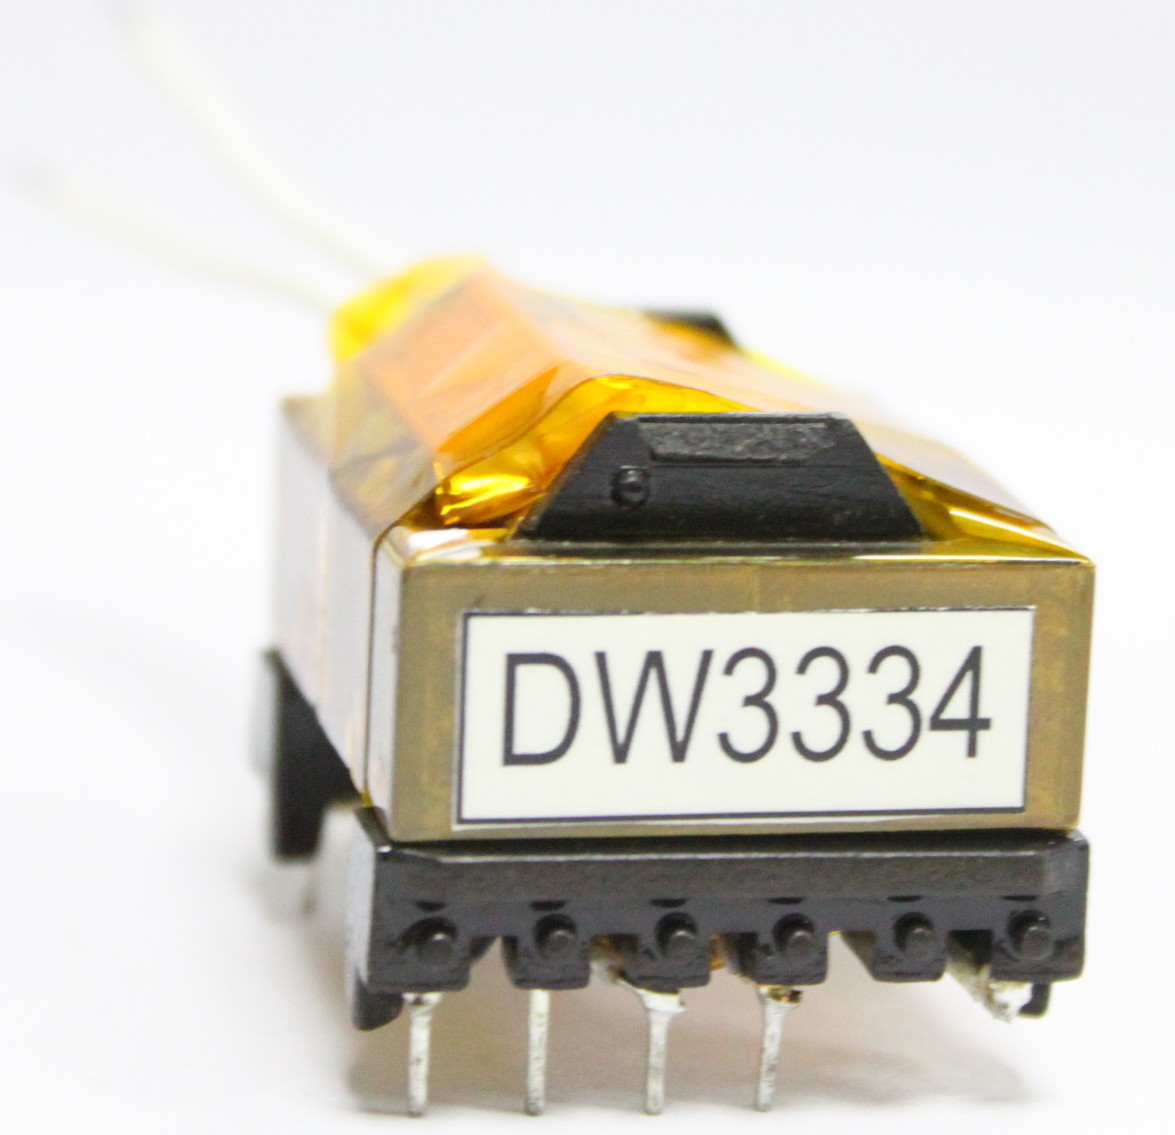 ER28 High Frequency Transformer Manufacture Customized DW3334